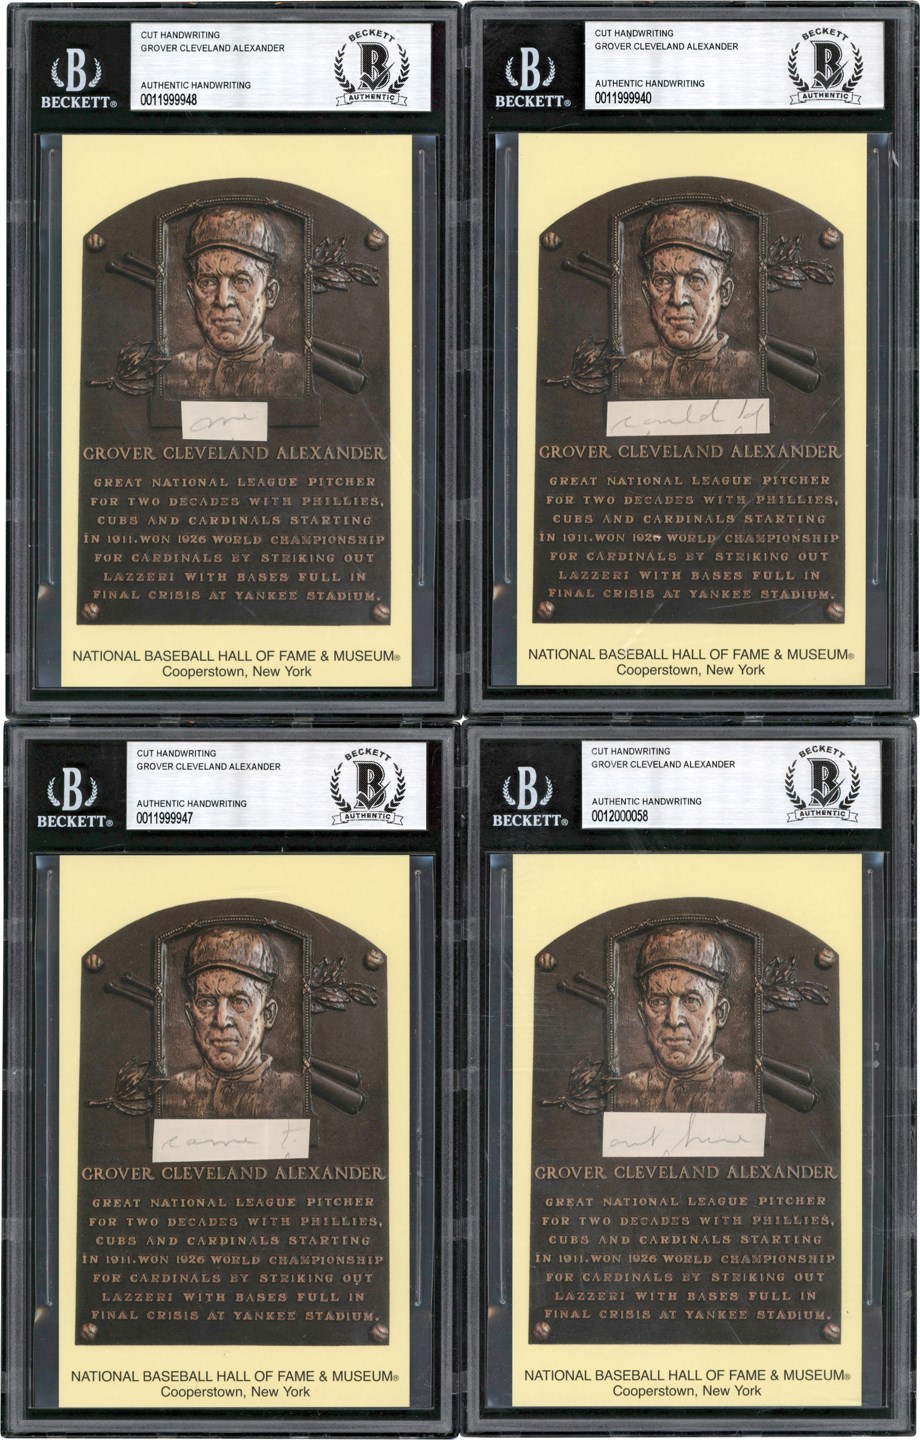 Baseball Autographs - Grover Cleveland Alexander Handwriting Cuts on Hall of Fame Plaques (8)(Beckett)